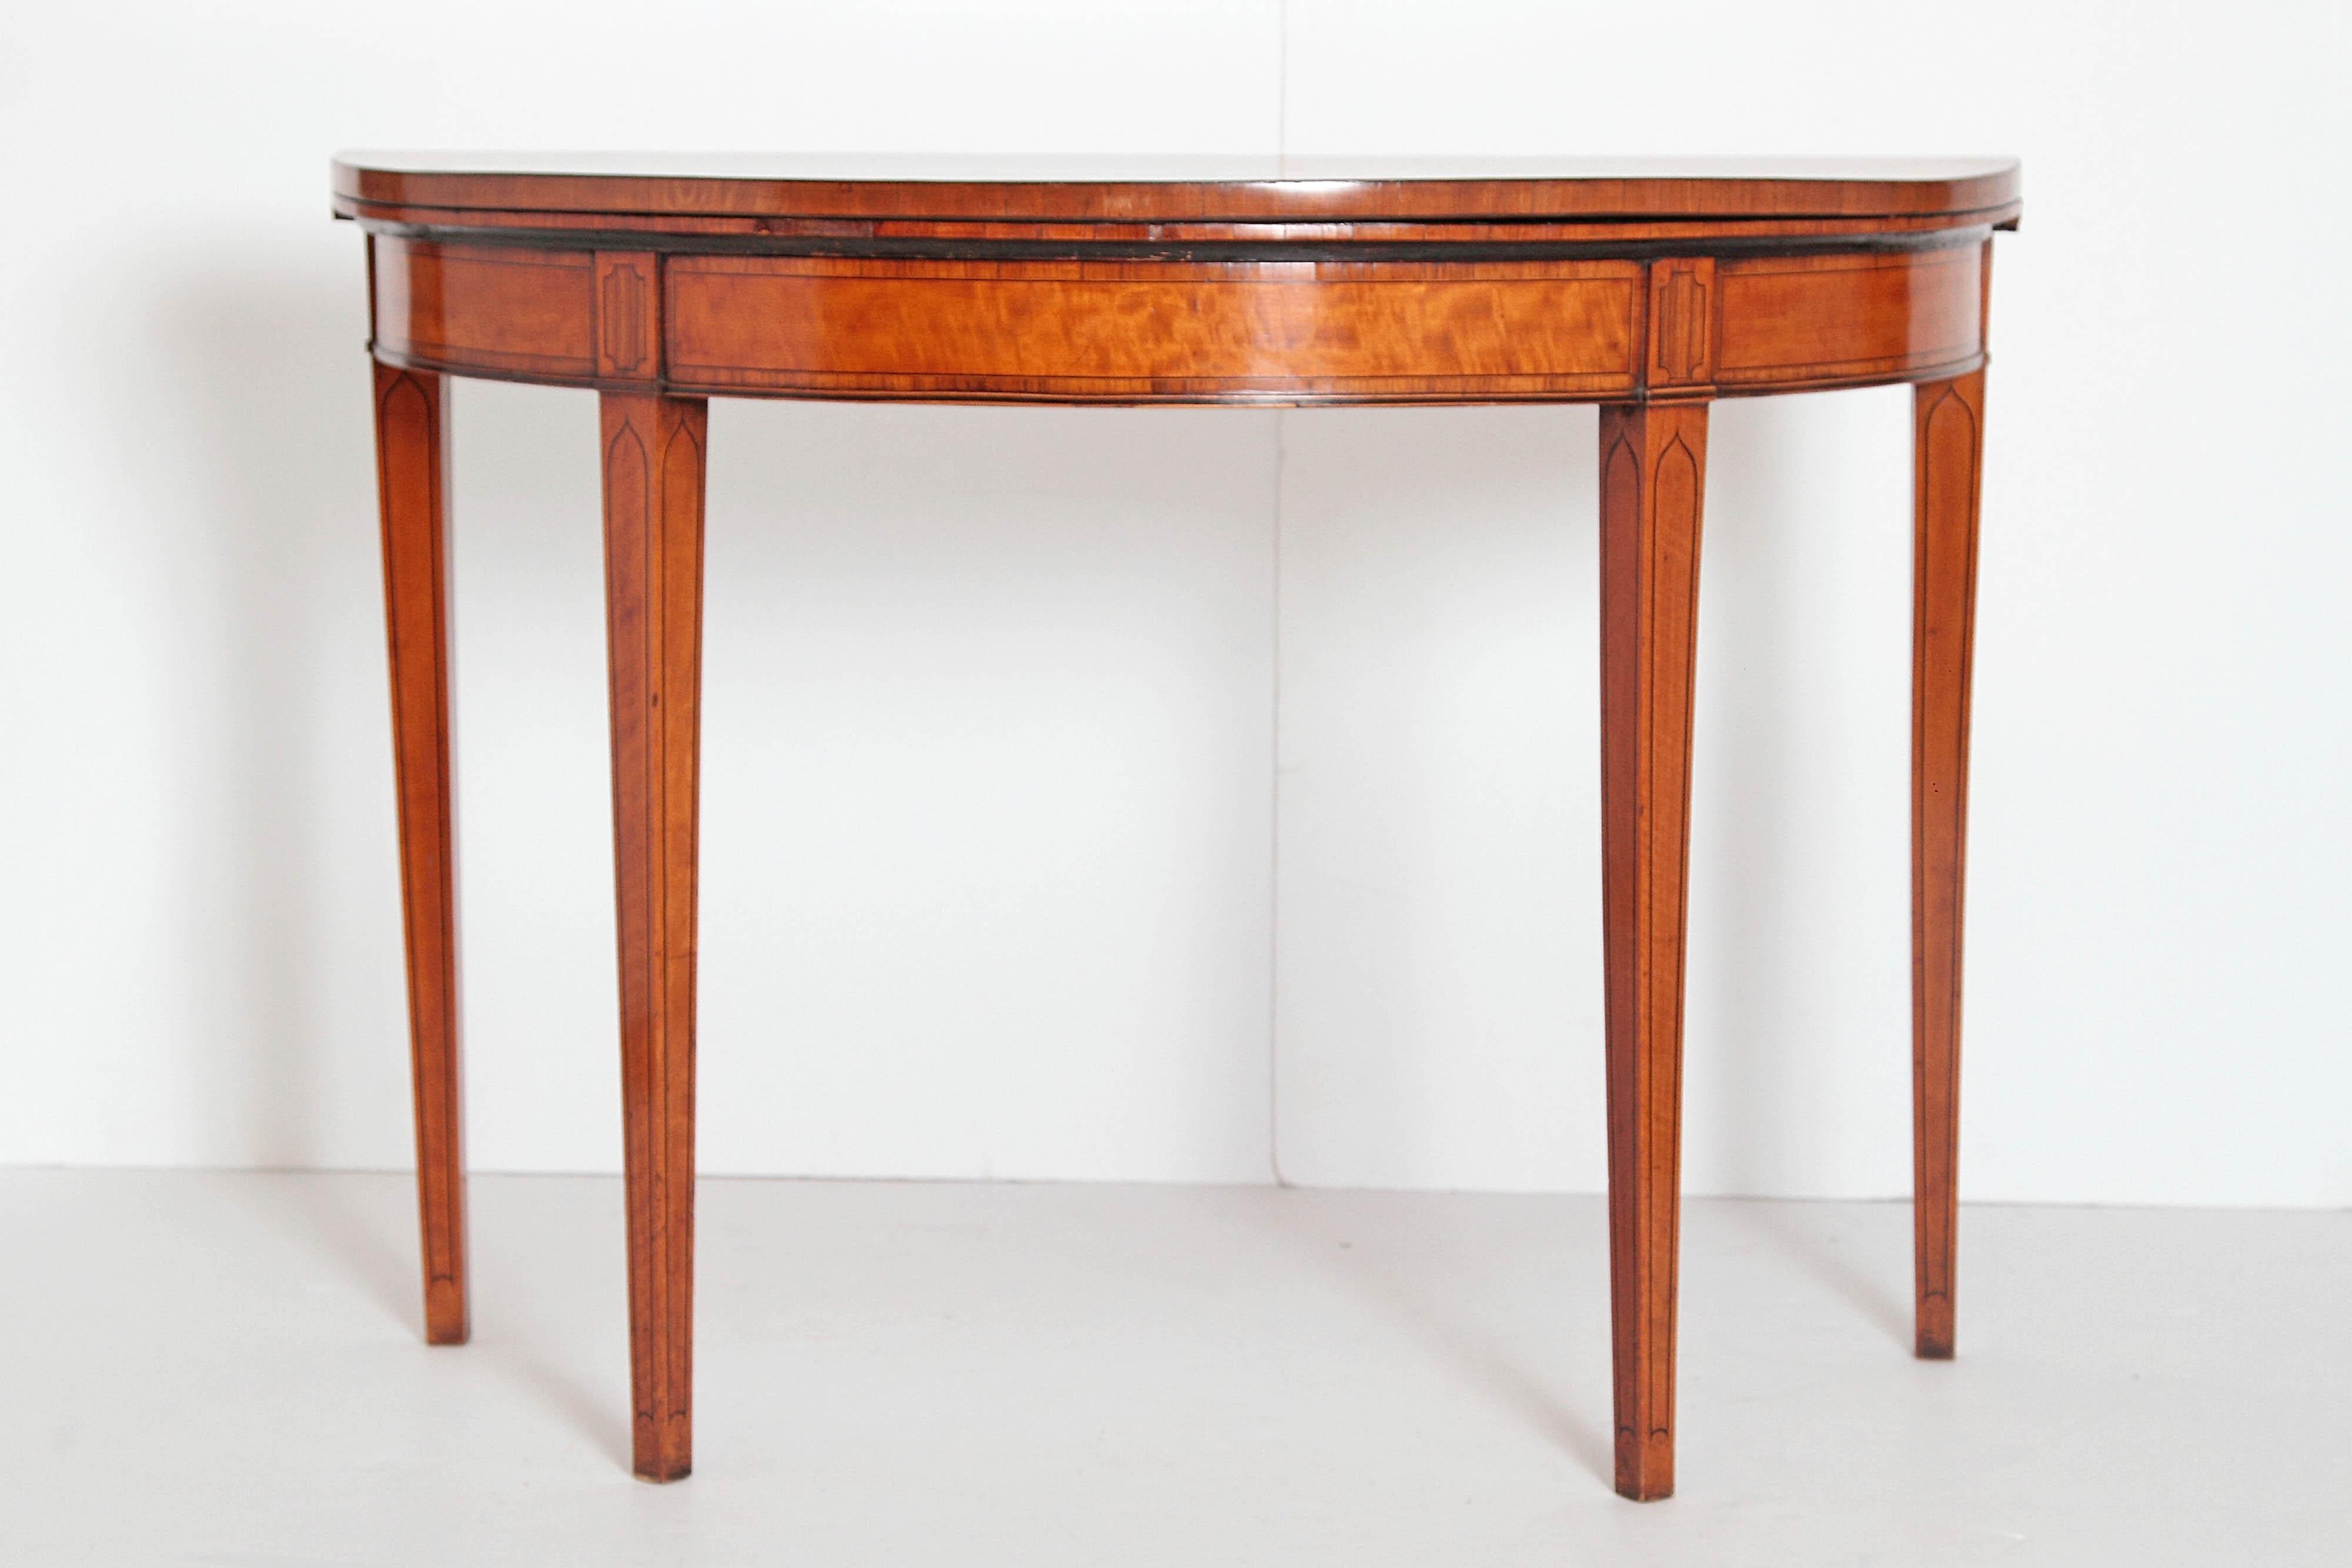 A handsome demilune tea table / games table with crossbanded edge bordering the top. The back legs fold out and the top opens up to a tan suede playing surface. Opens to 38.5